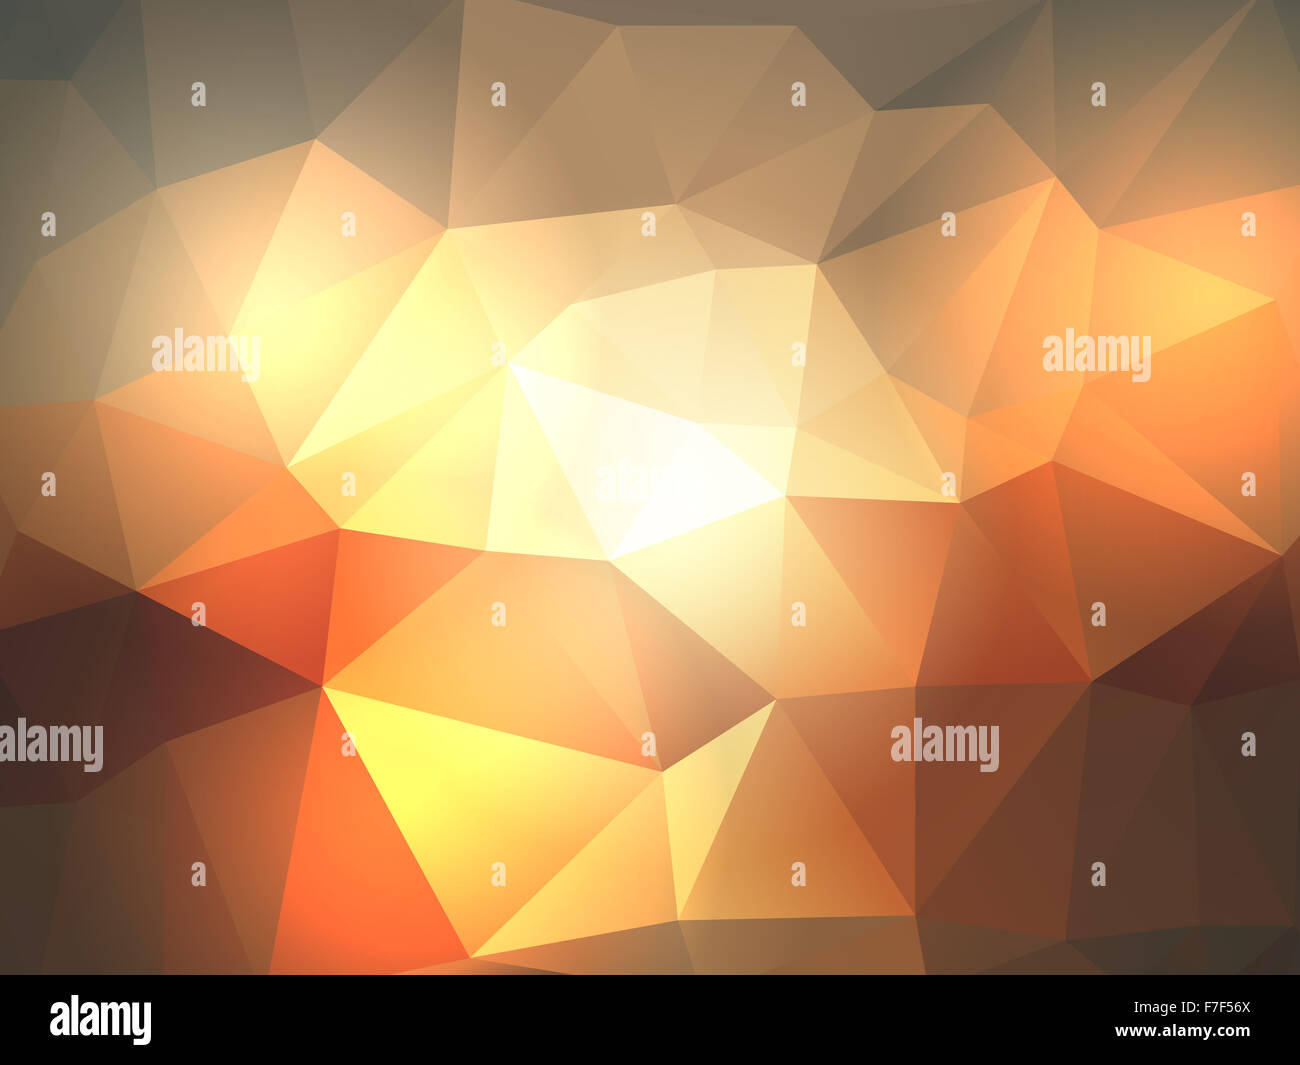 Abstract background with a low poly design Stock Photo